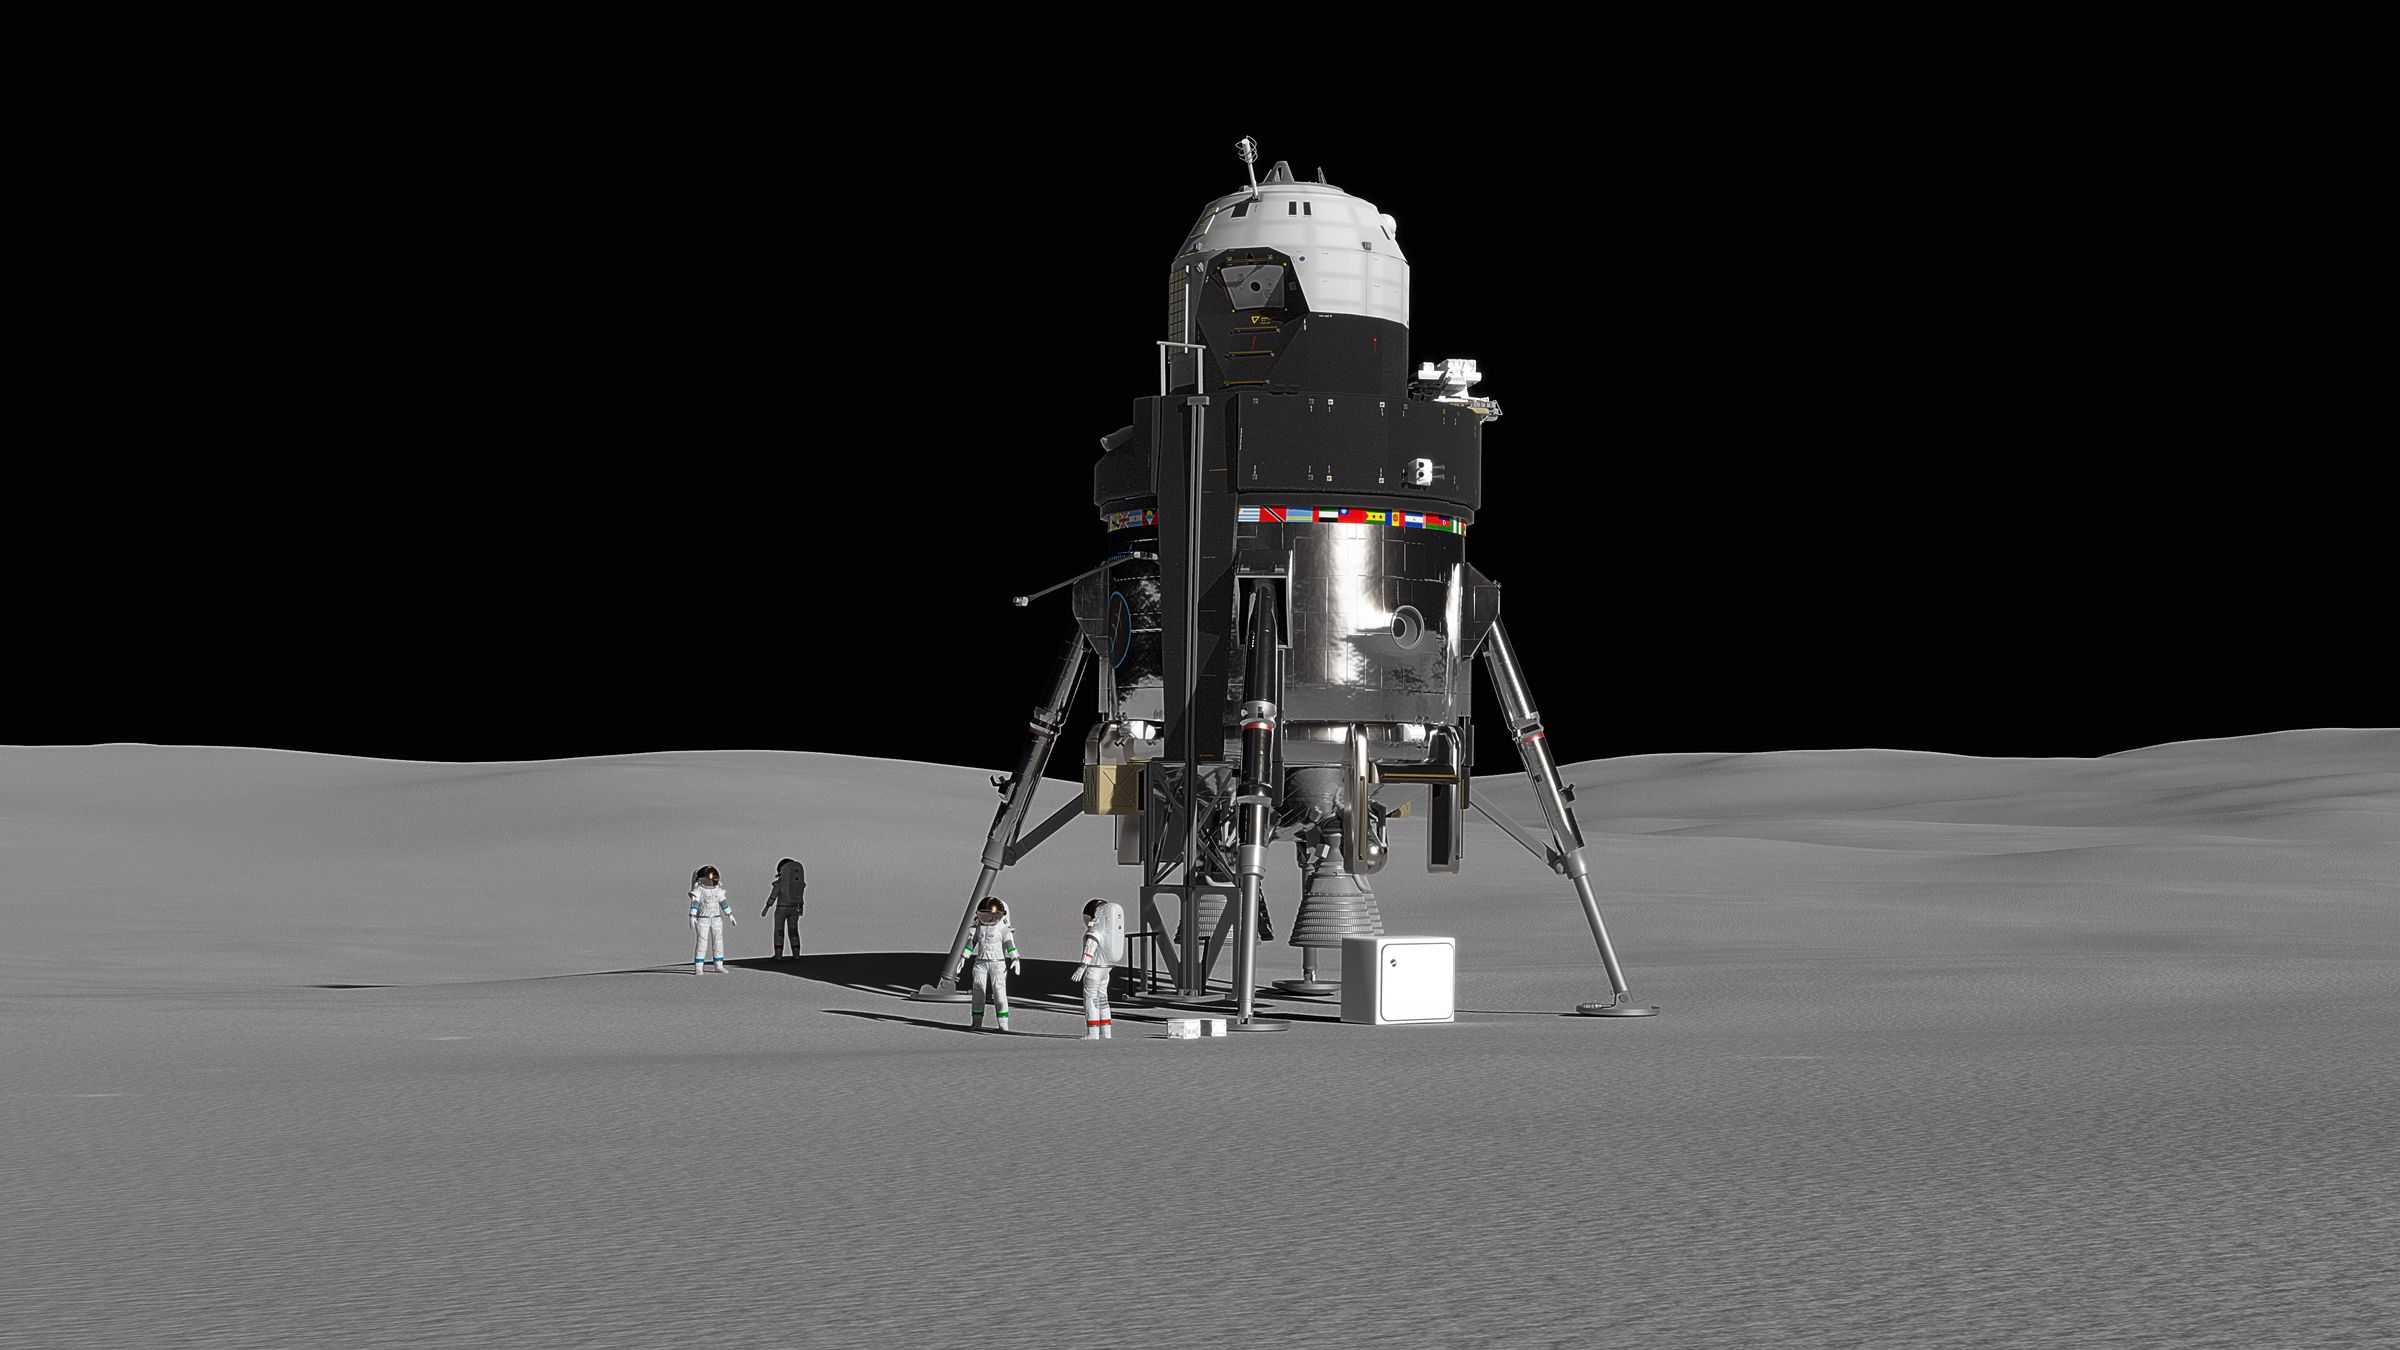 An artistic rendering of Lockheed’s crewed lunar lander on the surface of the Moon